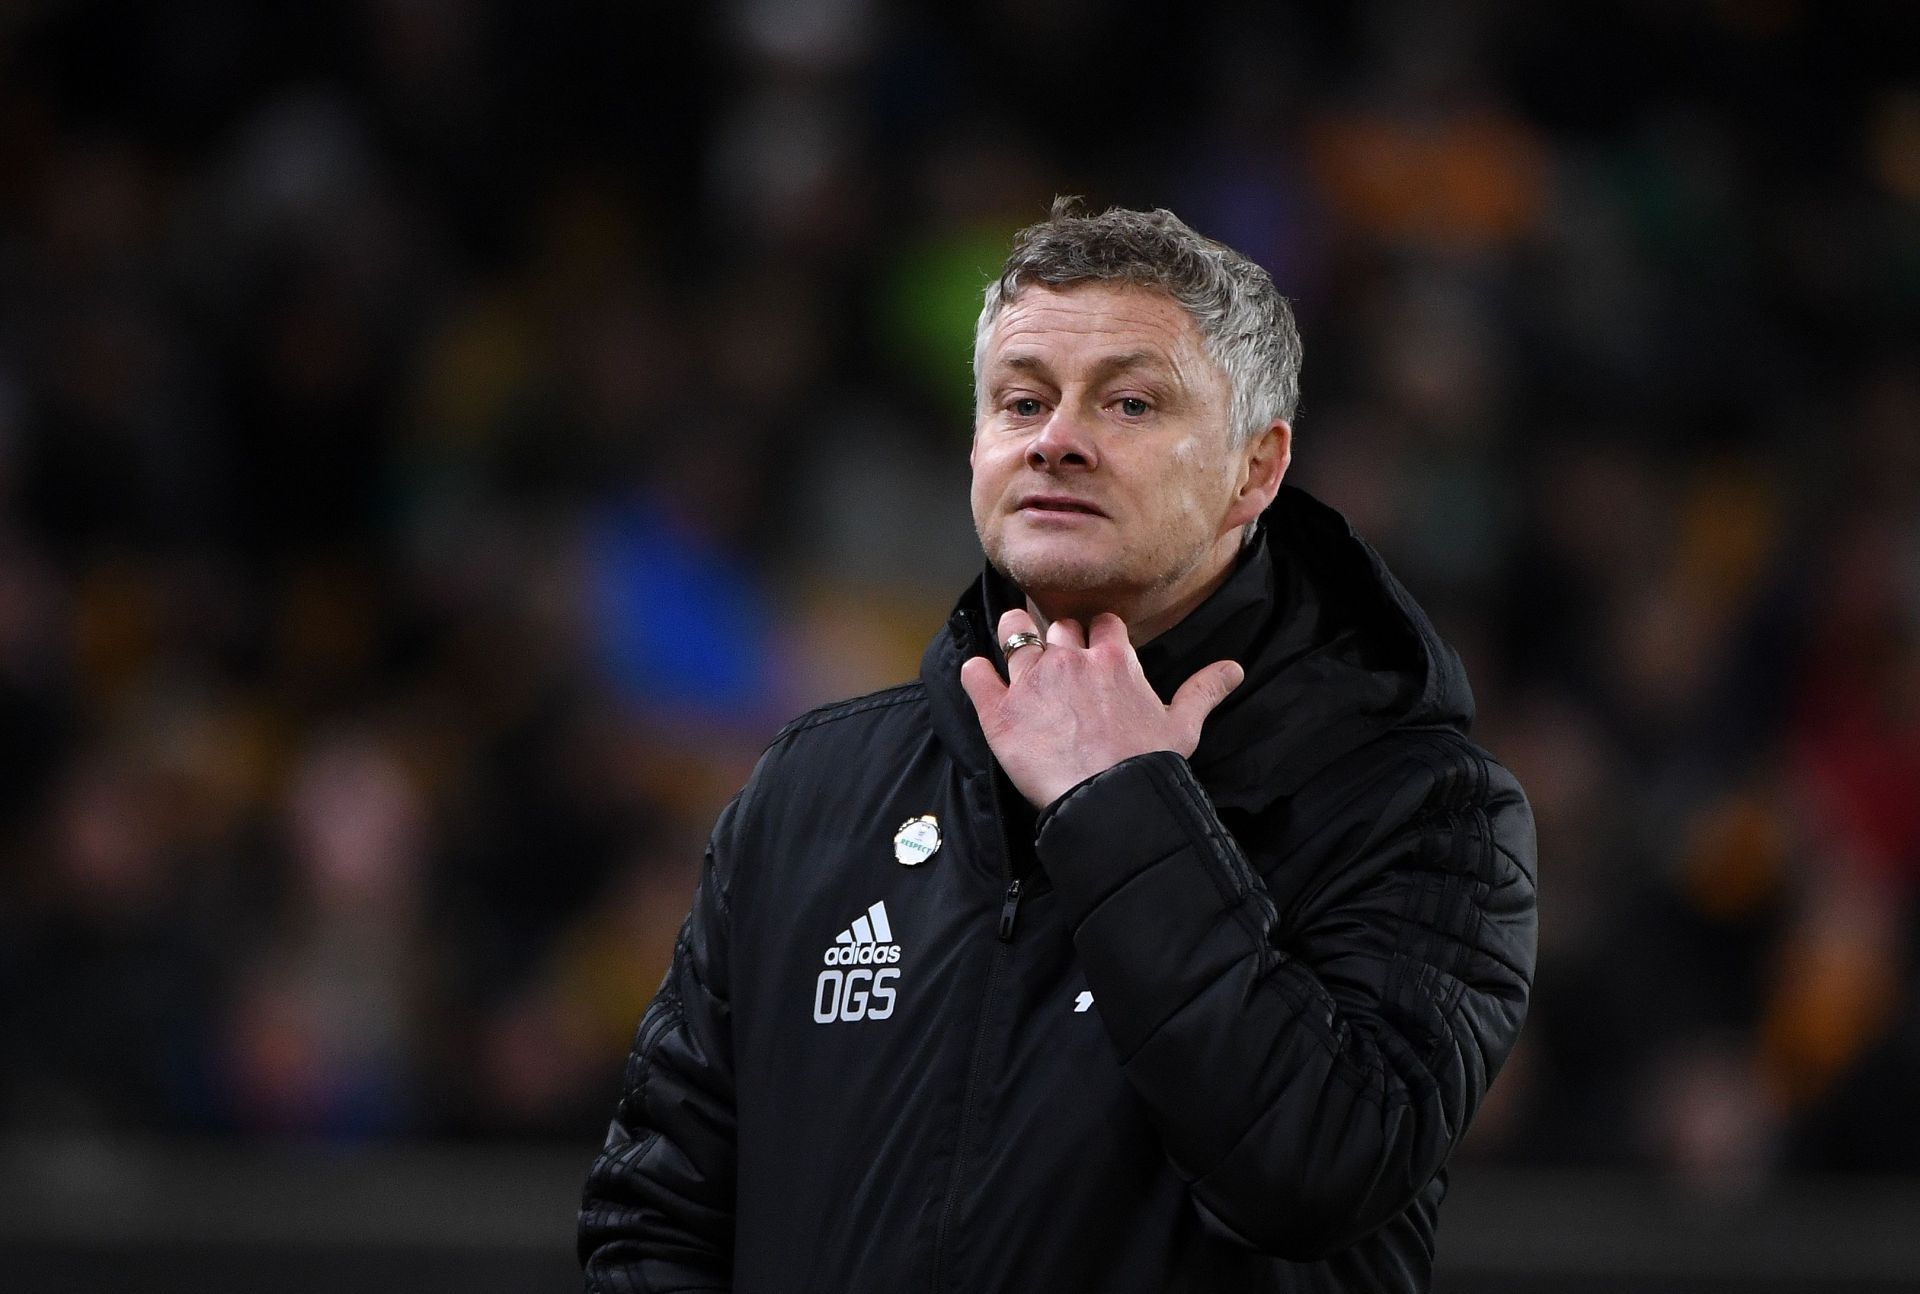 Ole Gunnar Solskjaer is struggling to turn things around at Manchester United.